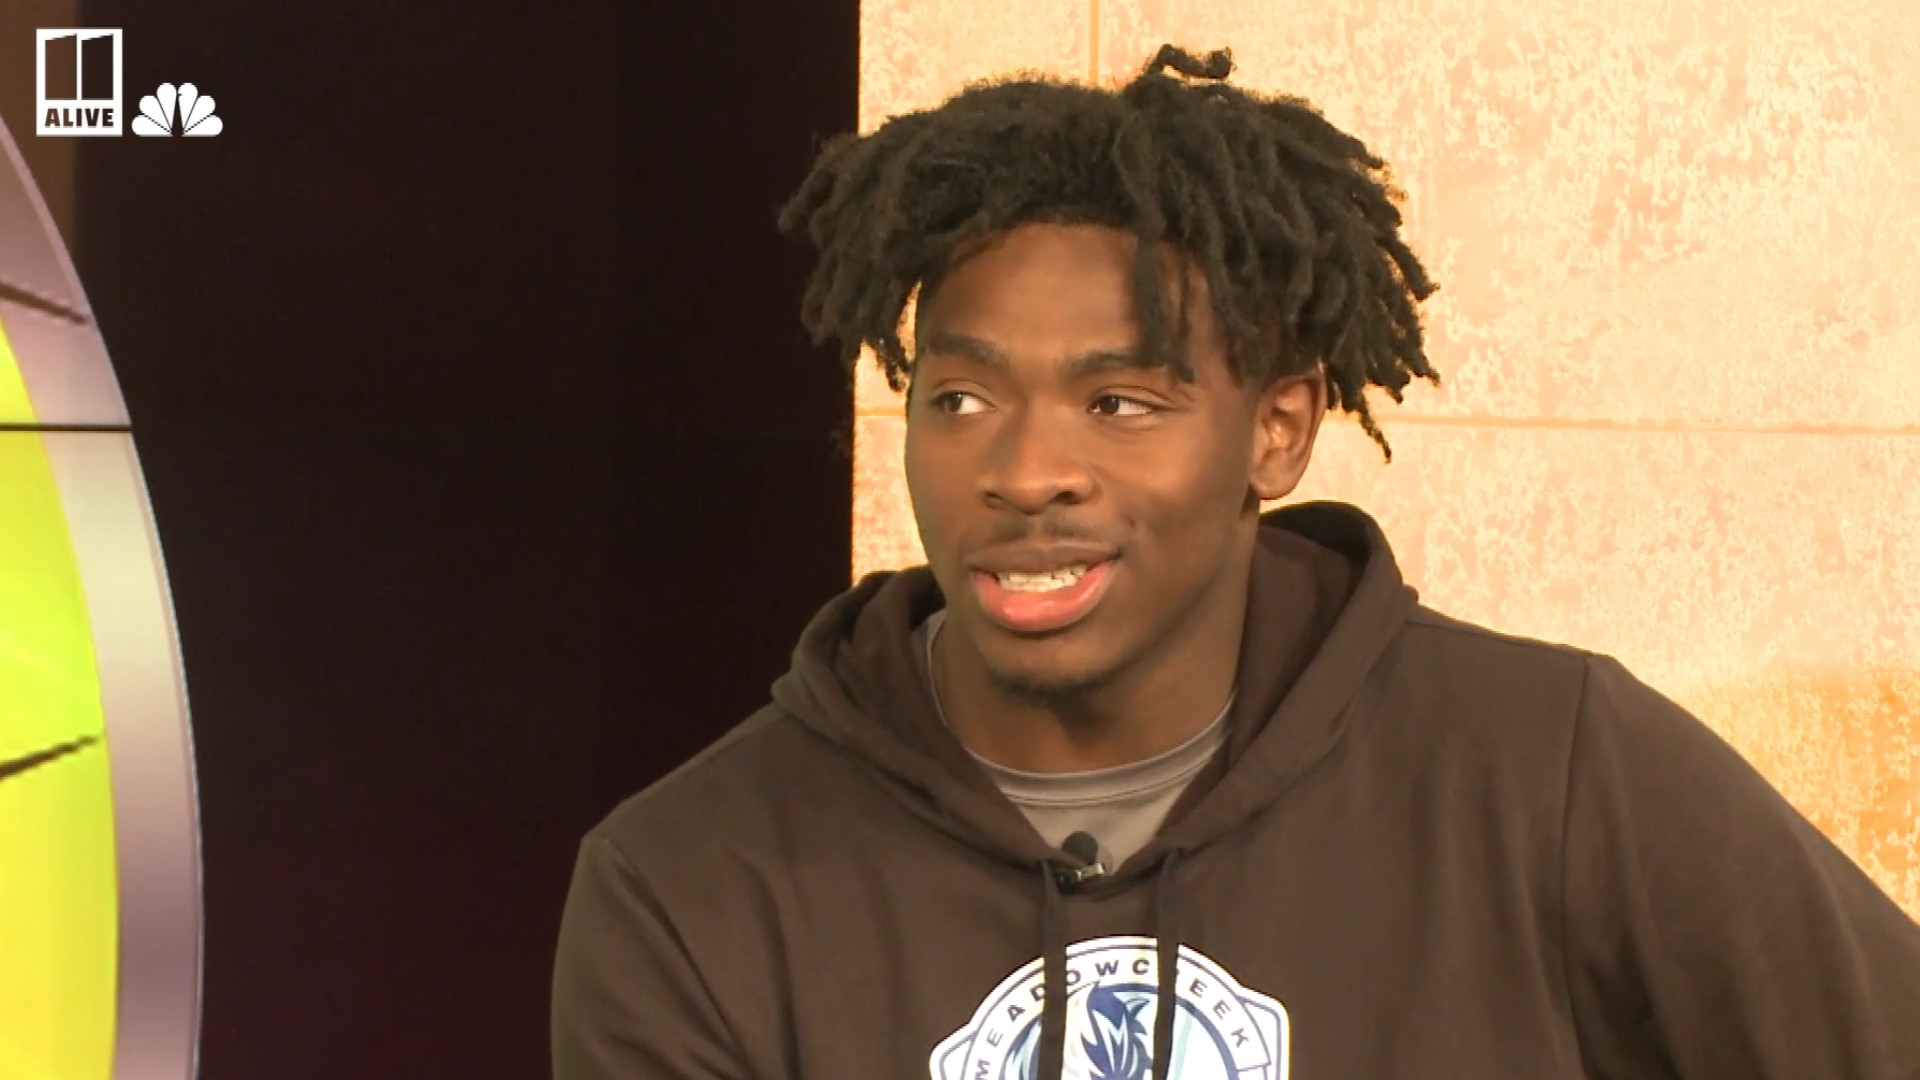 11Alive's Alex Benson talks with Meadowcreek High School running back Jordan Louie, a senior who has committed to West Virginia.